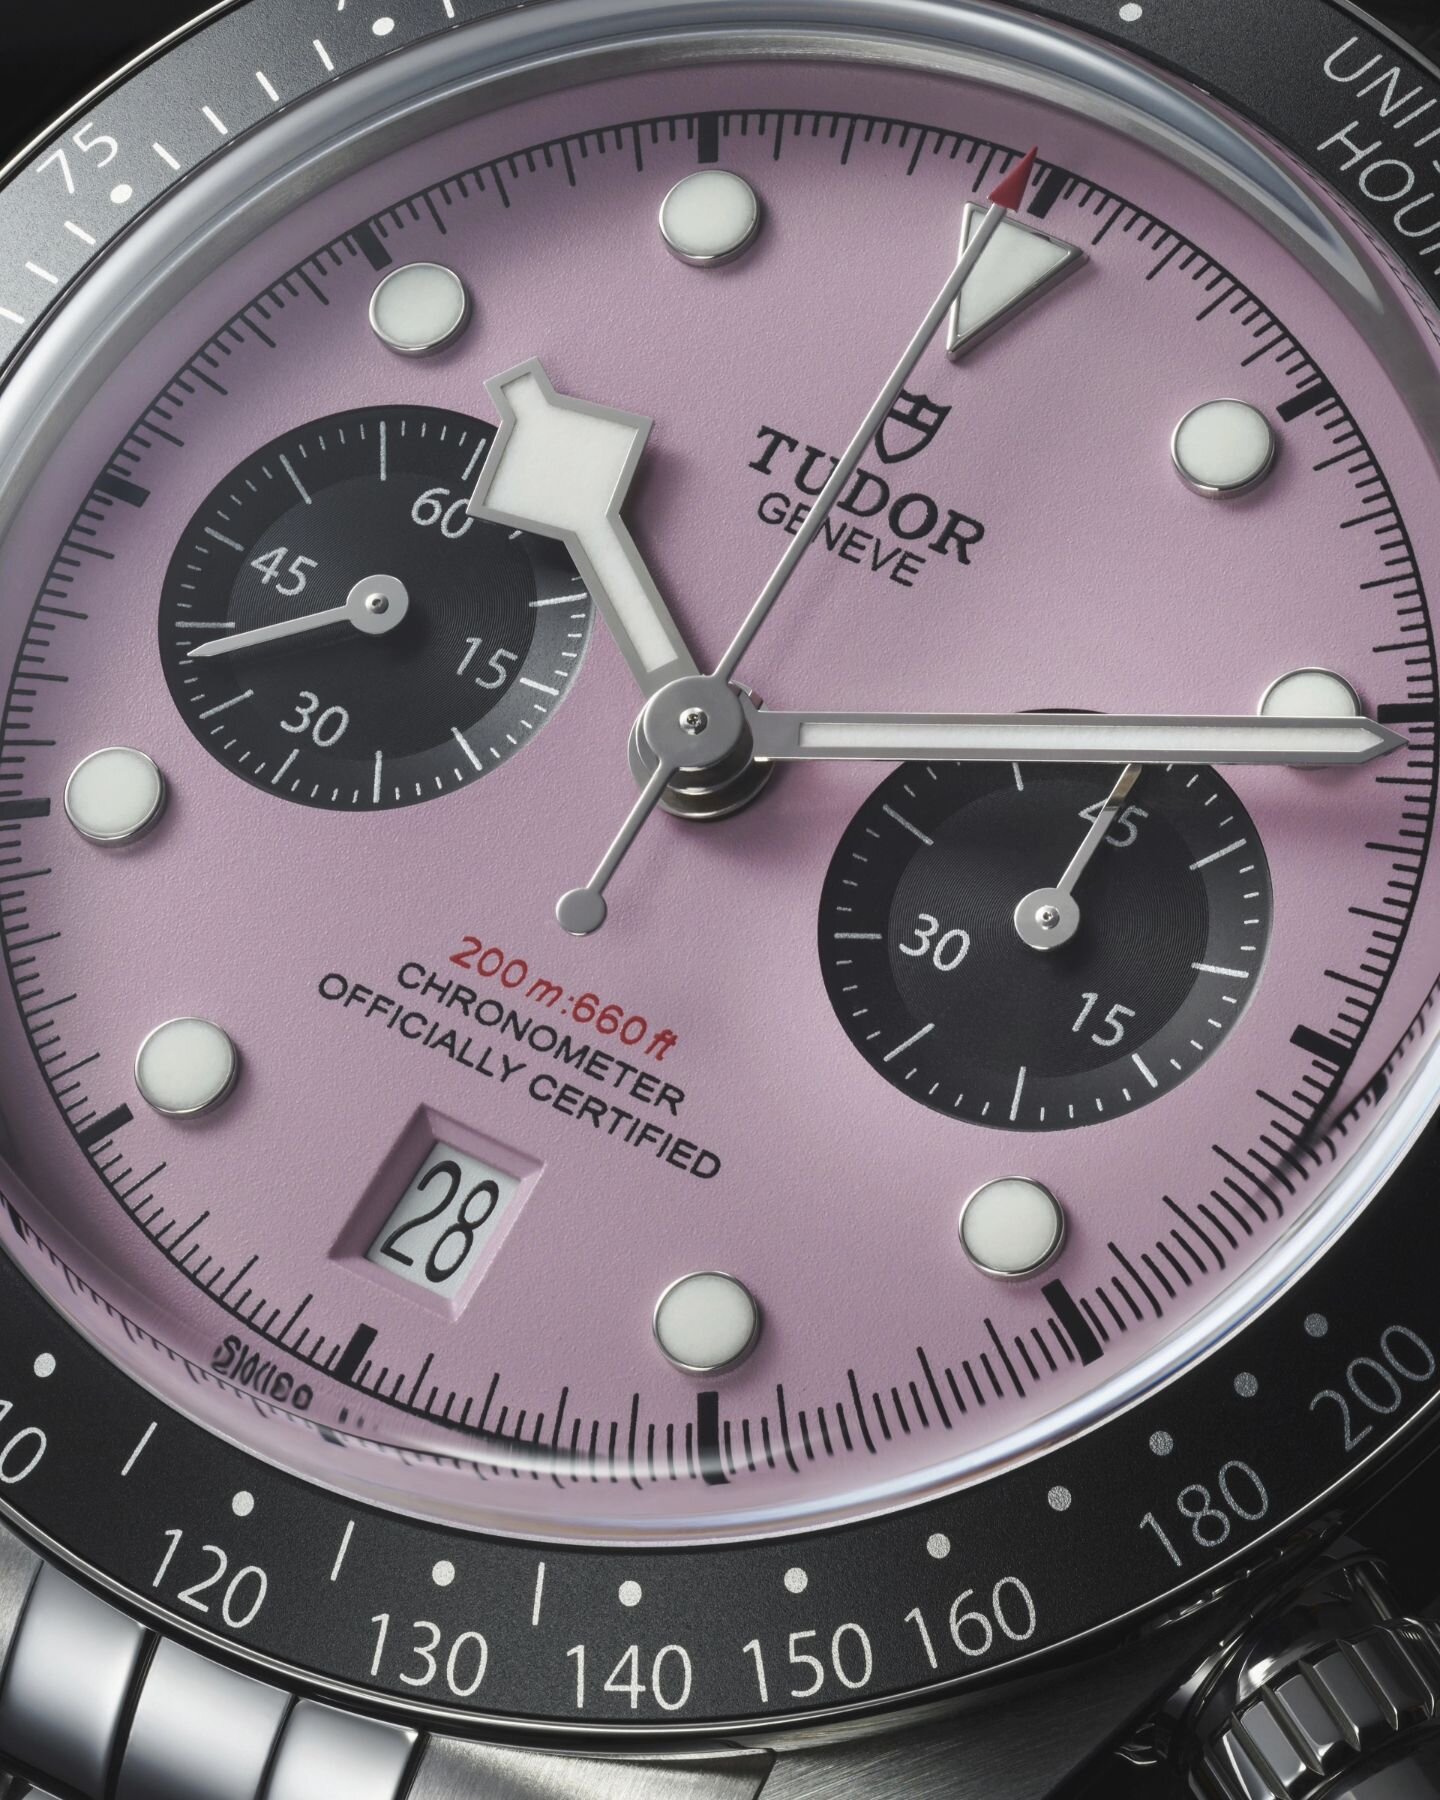 Dare to be different with the new #TudorBlackBay Chrono &ldquo;Pink&rdquo; inspired by the daring spirit of TUDOR ambassadors. A pink dial might seem unexpected at first, but going against the grain is part of @tudorwatch core DNA. This new version o